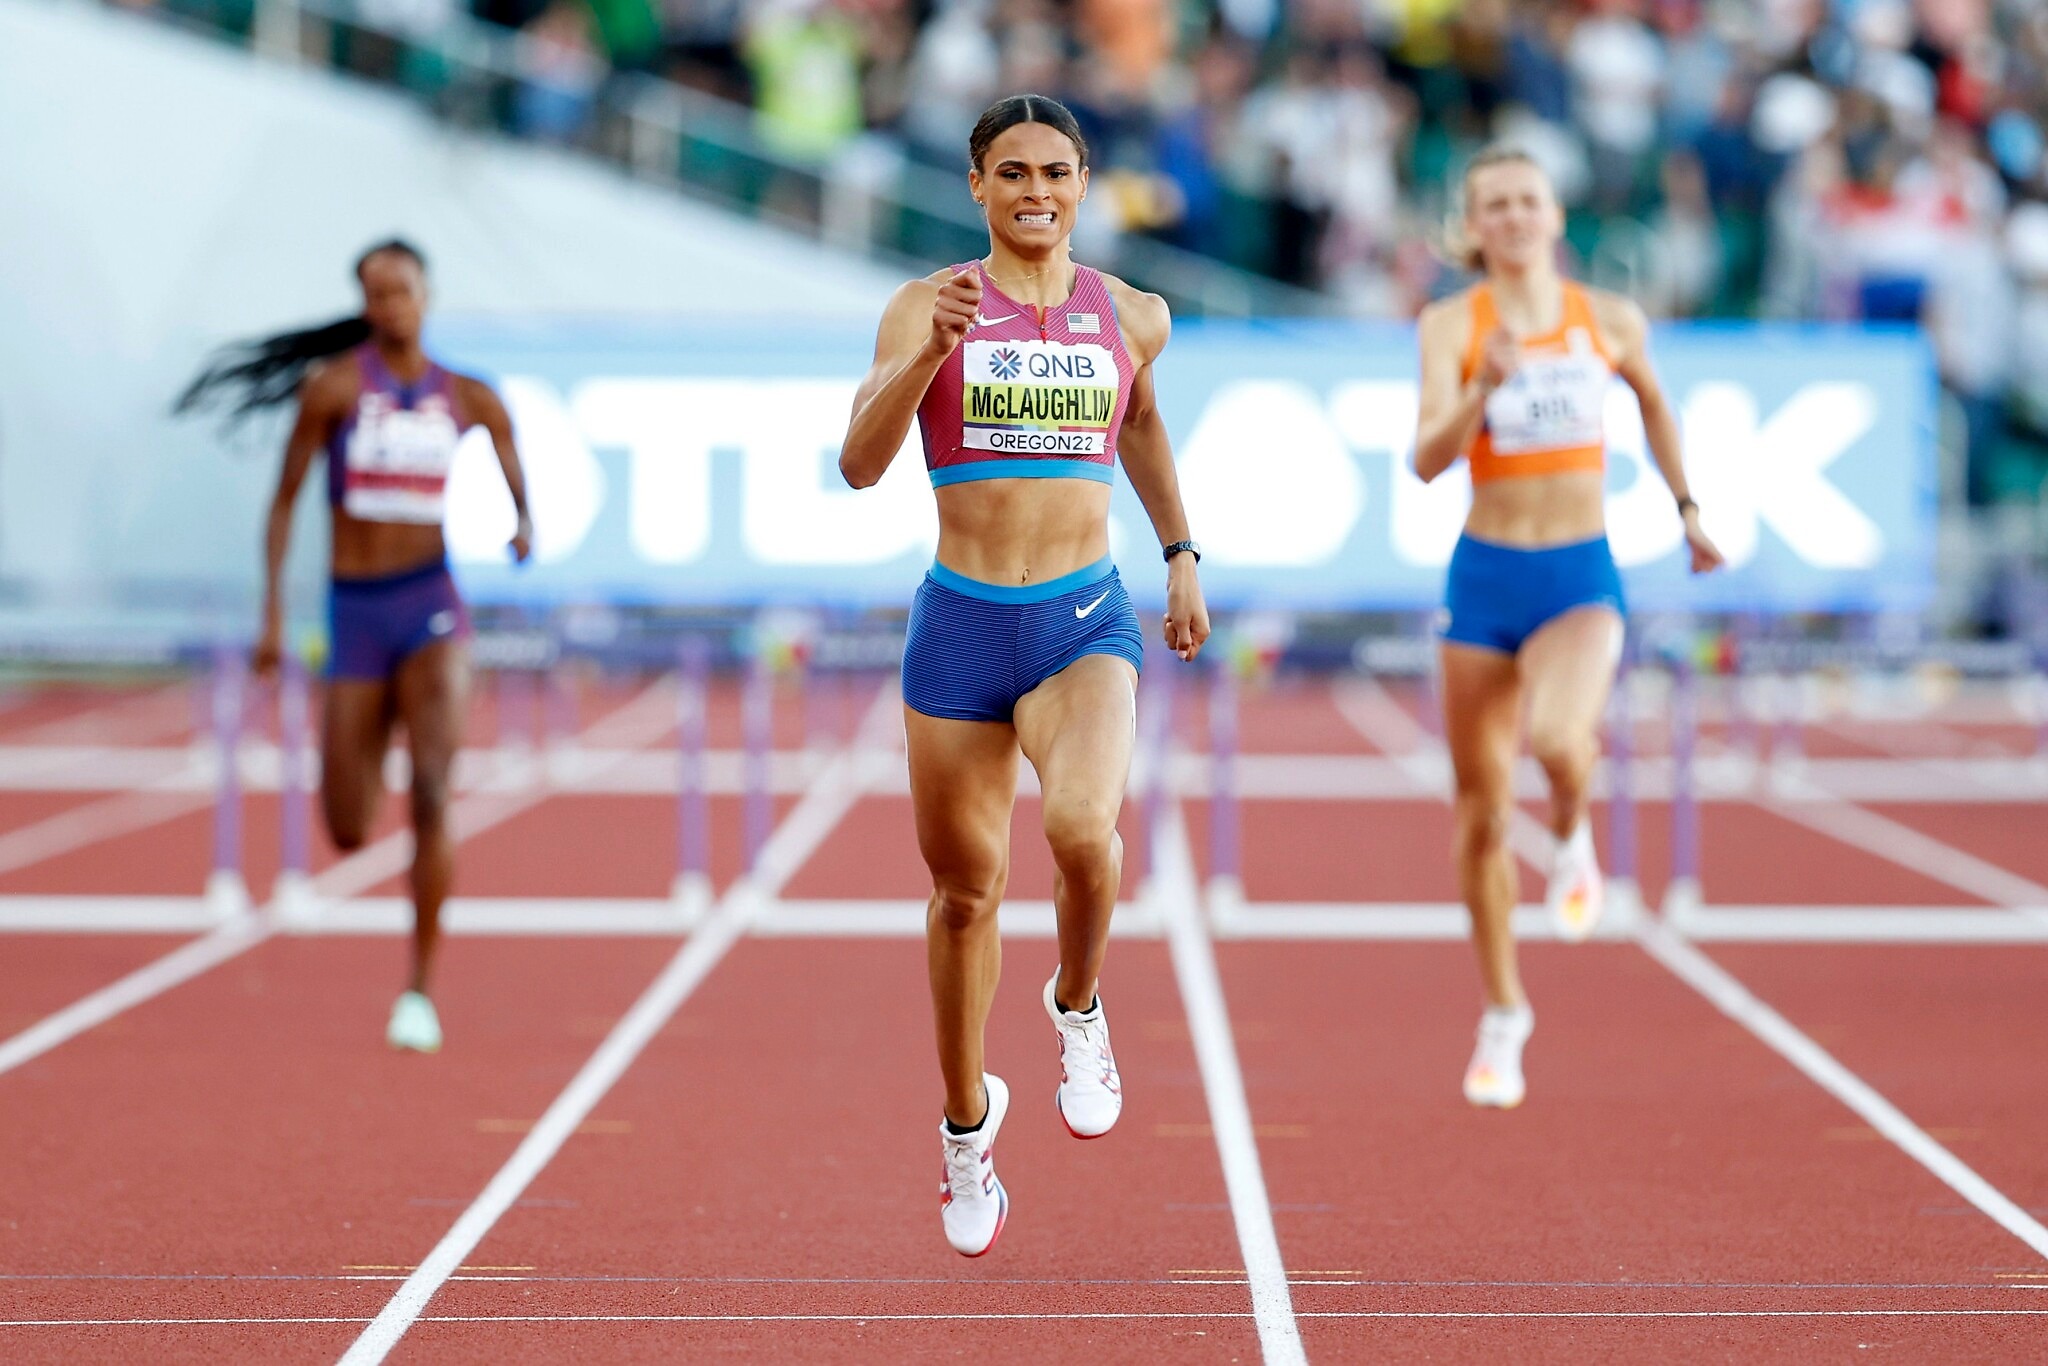 Sydney McLaughlin on her way to breaking the world 400m hurdles record in Oregon (© Getty Images)